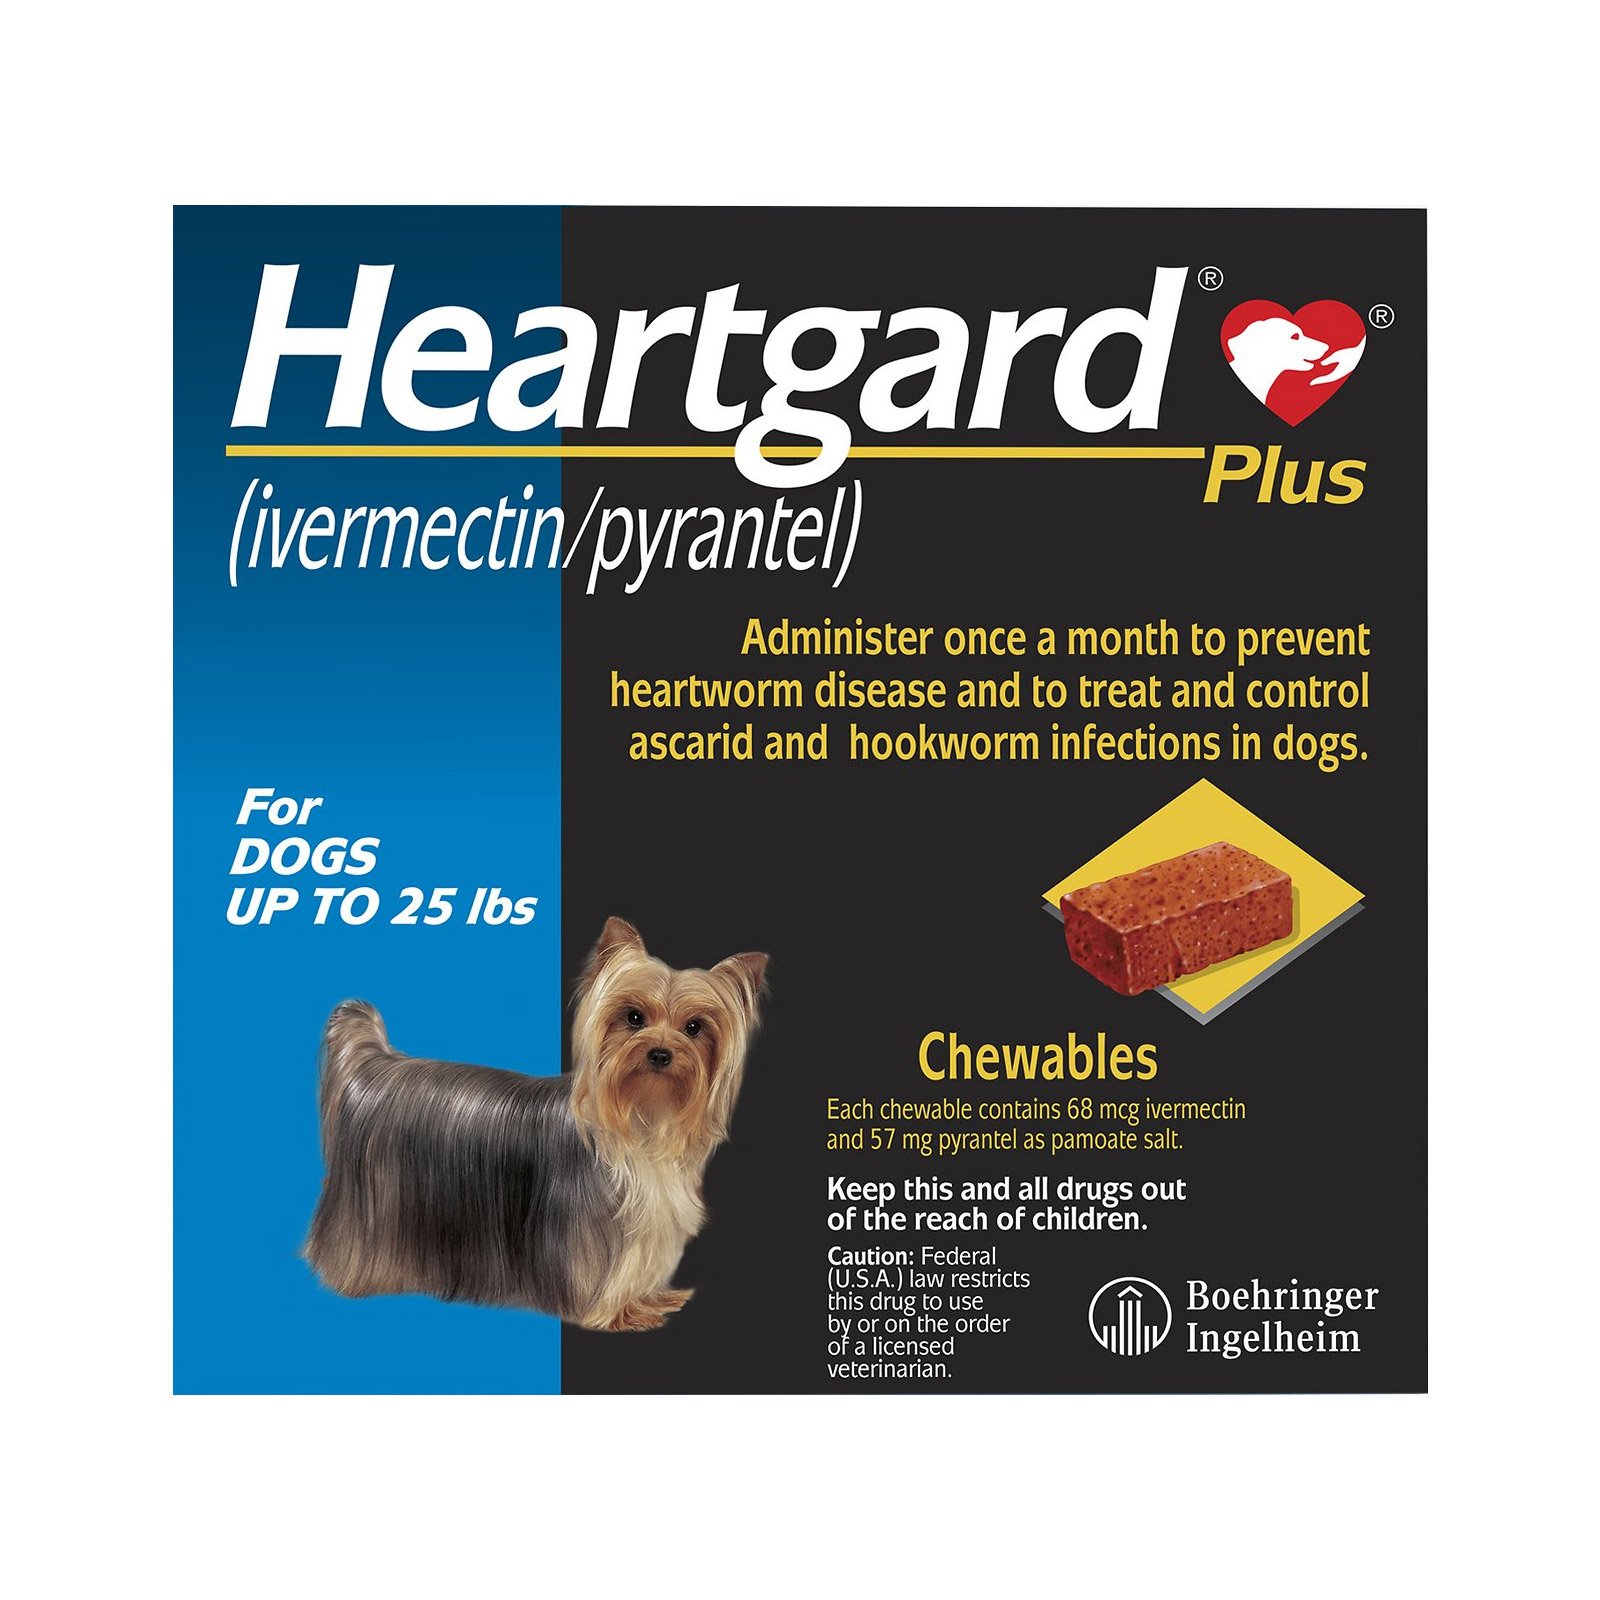 heartgard-plus-chewables-small-dogs-up-to-25lbs-blue_02092022_231929.jpg